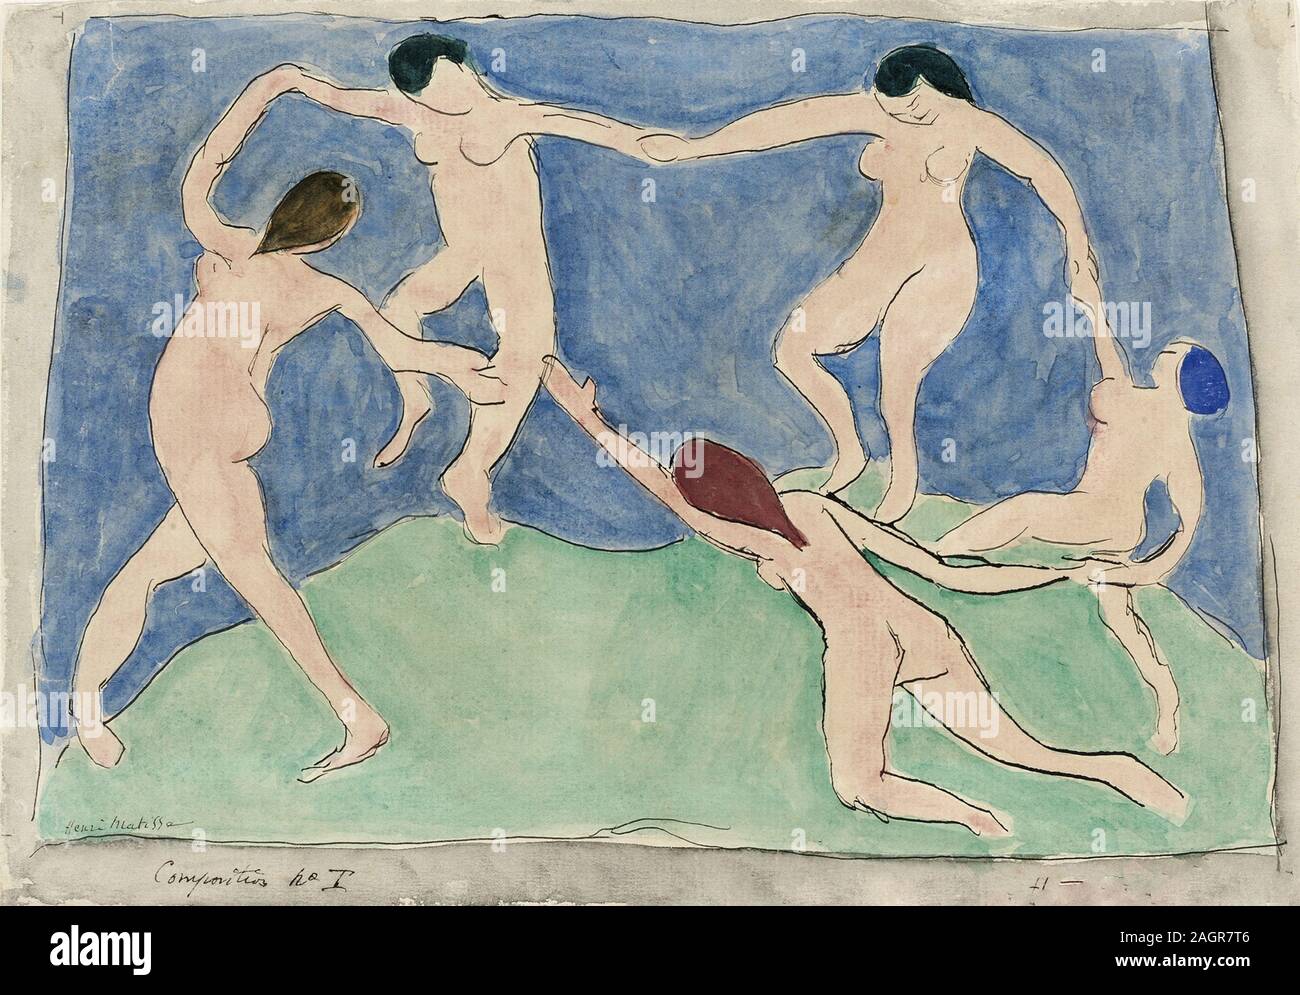 Dance (Composition No. I). Museum: State A. Pushkin Museum of Fine Arts, Moscow. Author: HENRI MATISSE. Stock Photo